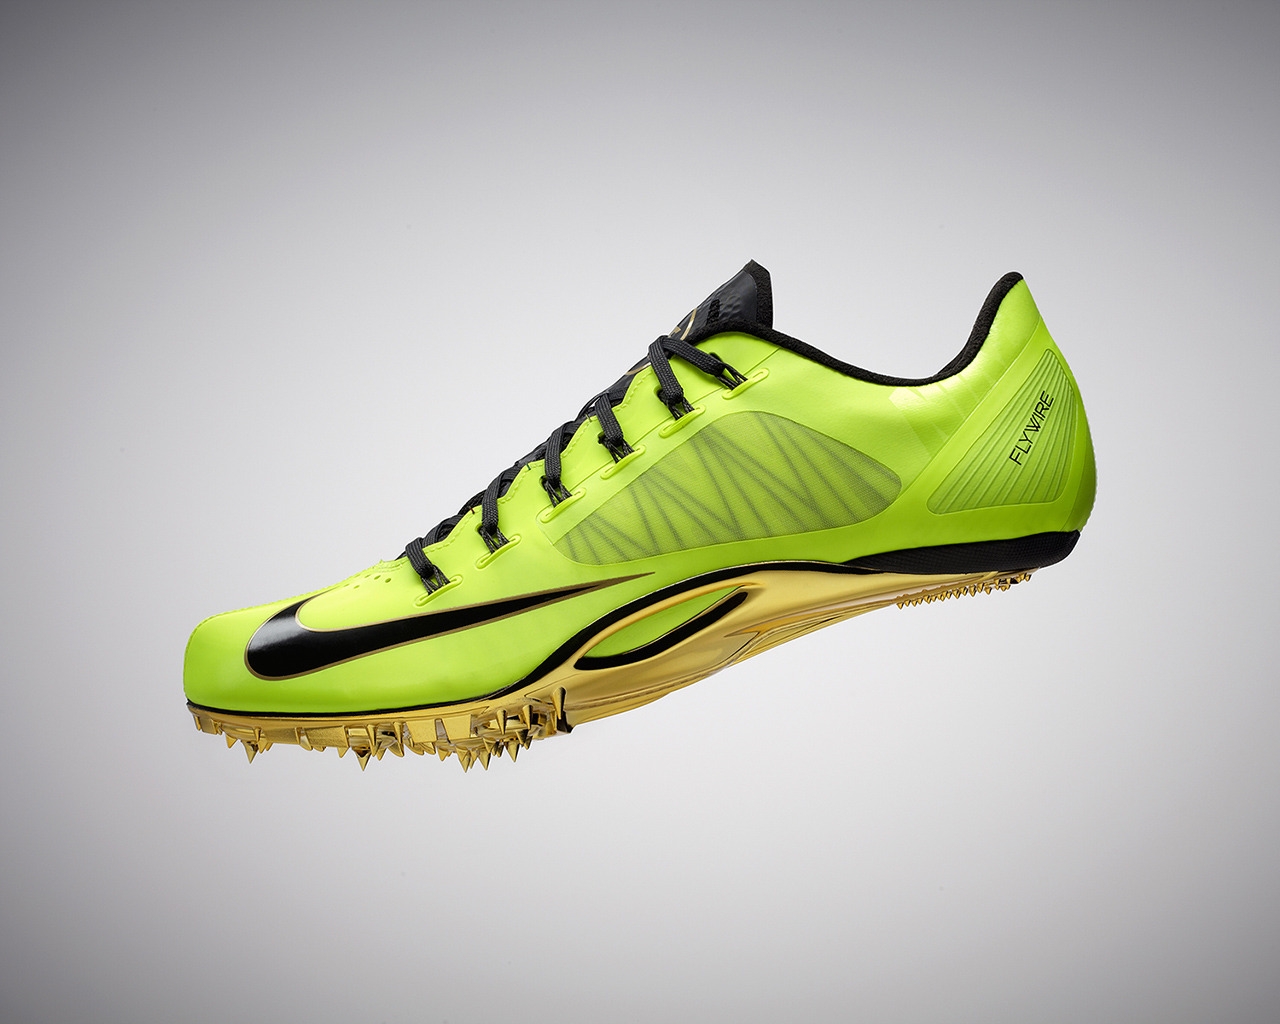 Nike Zoom Superfly R4 for 1280 x 1024 resolution